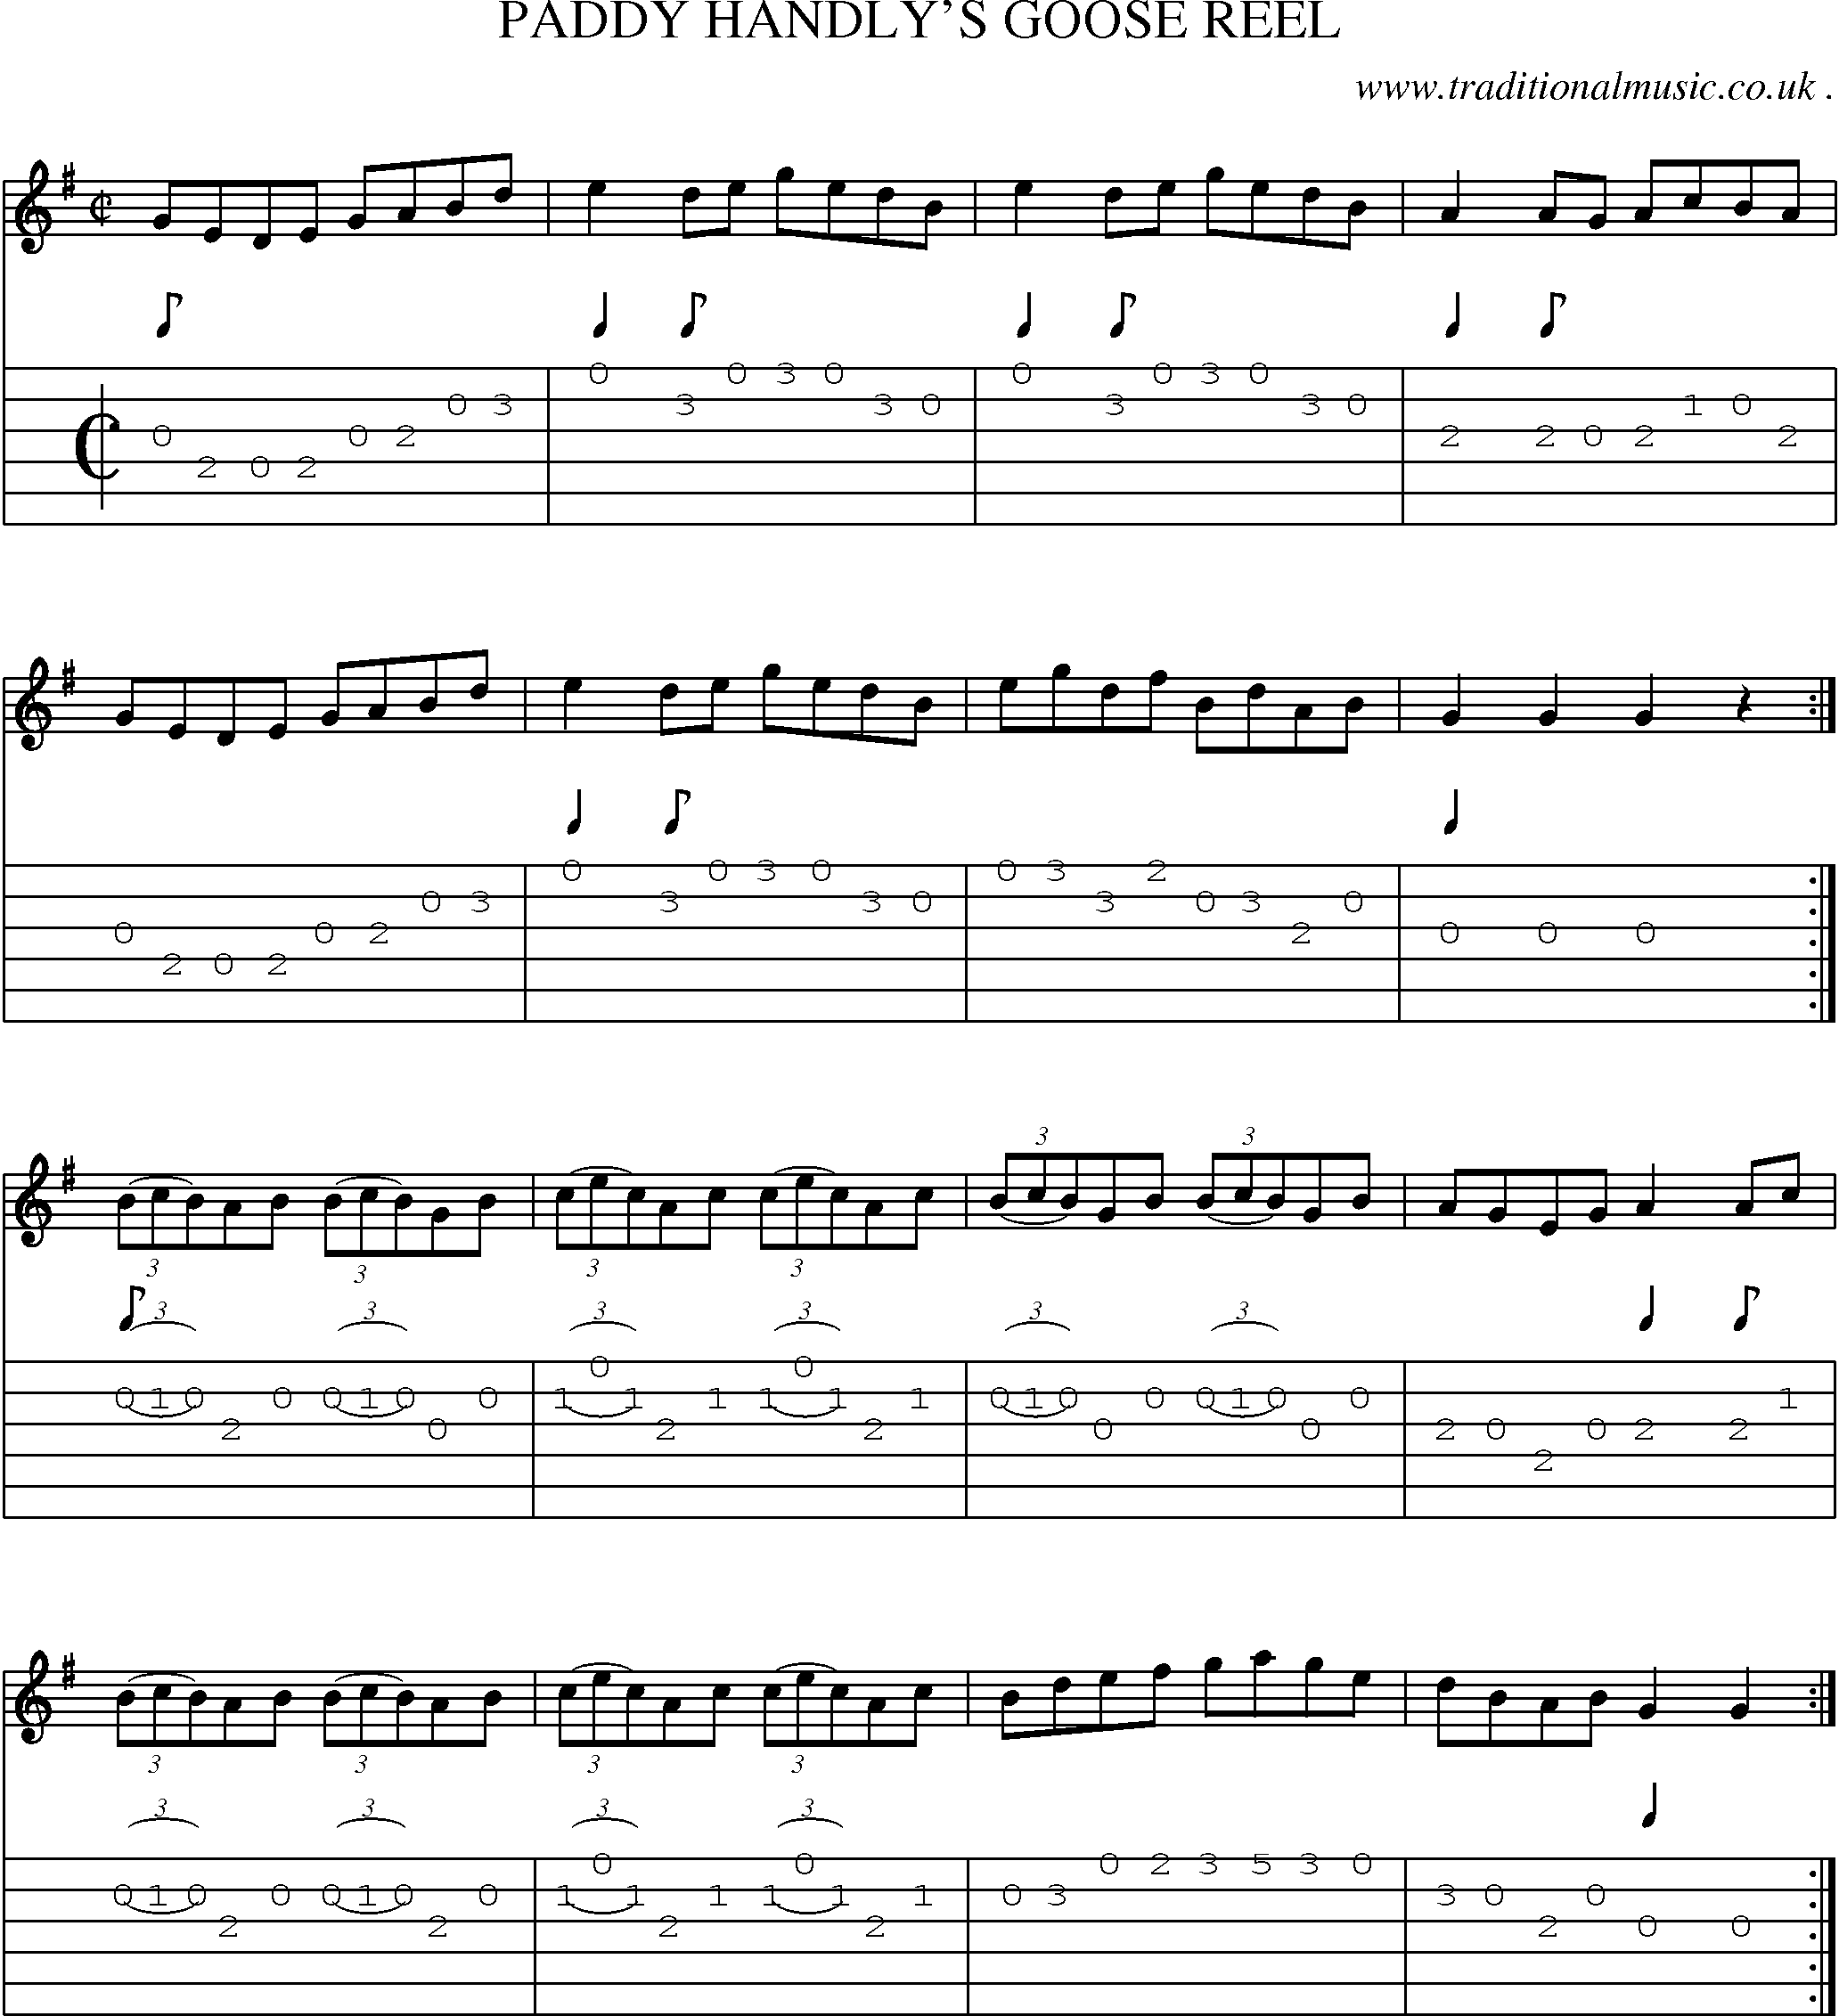 Sheet-Music and Guitar Tabs for Paddy Handlys Goose Reel